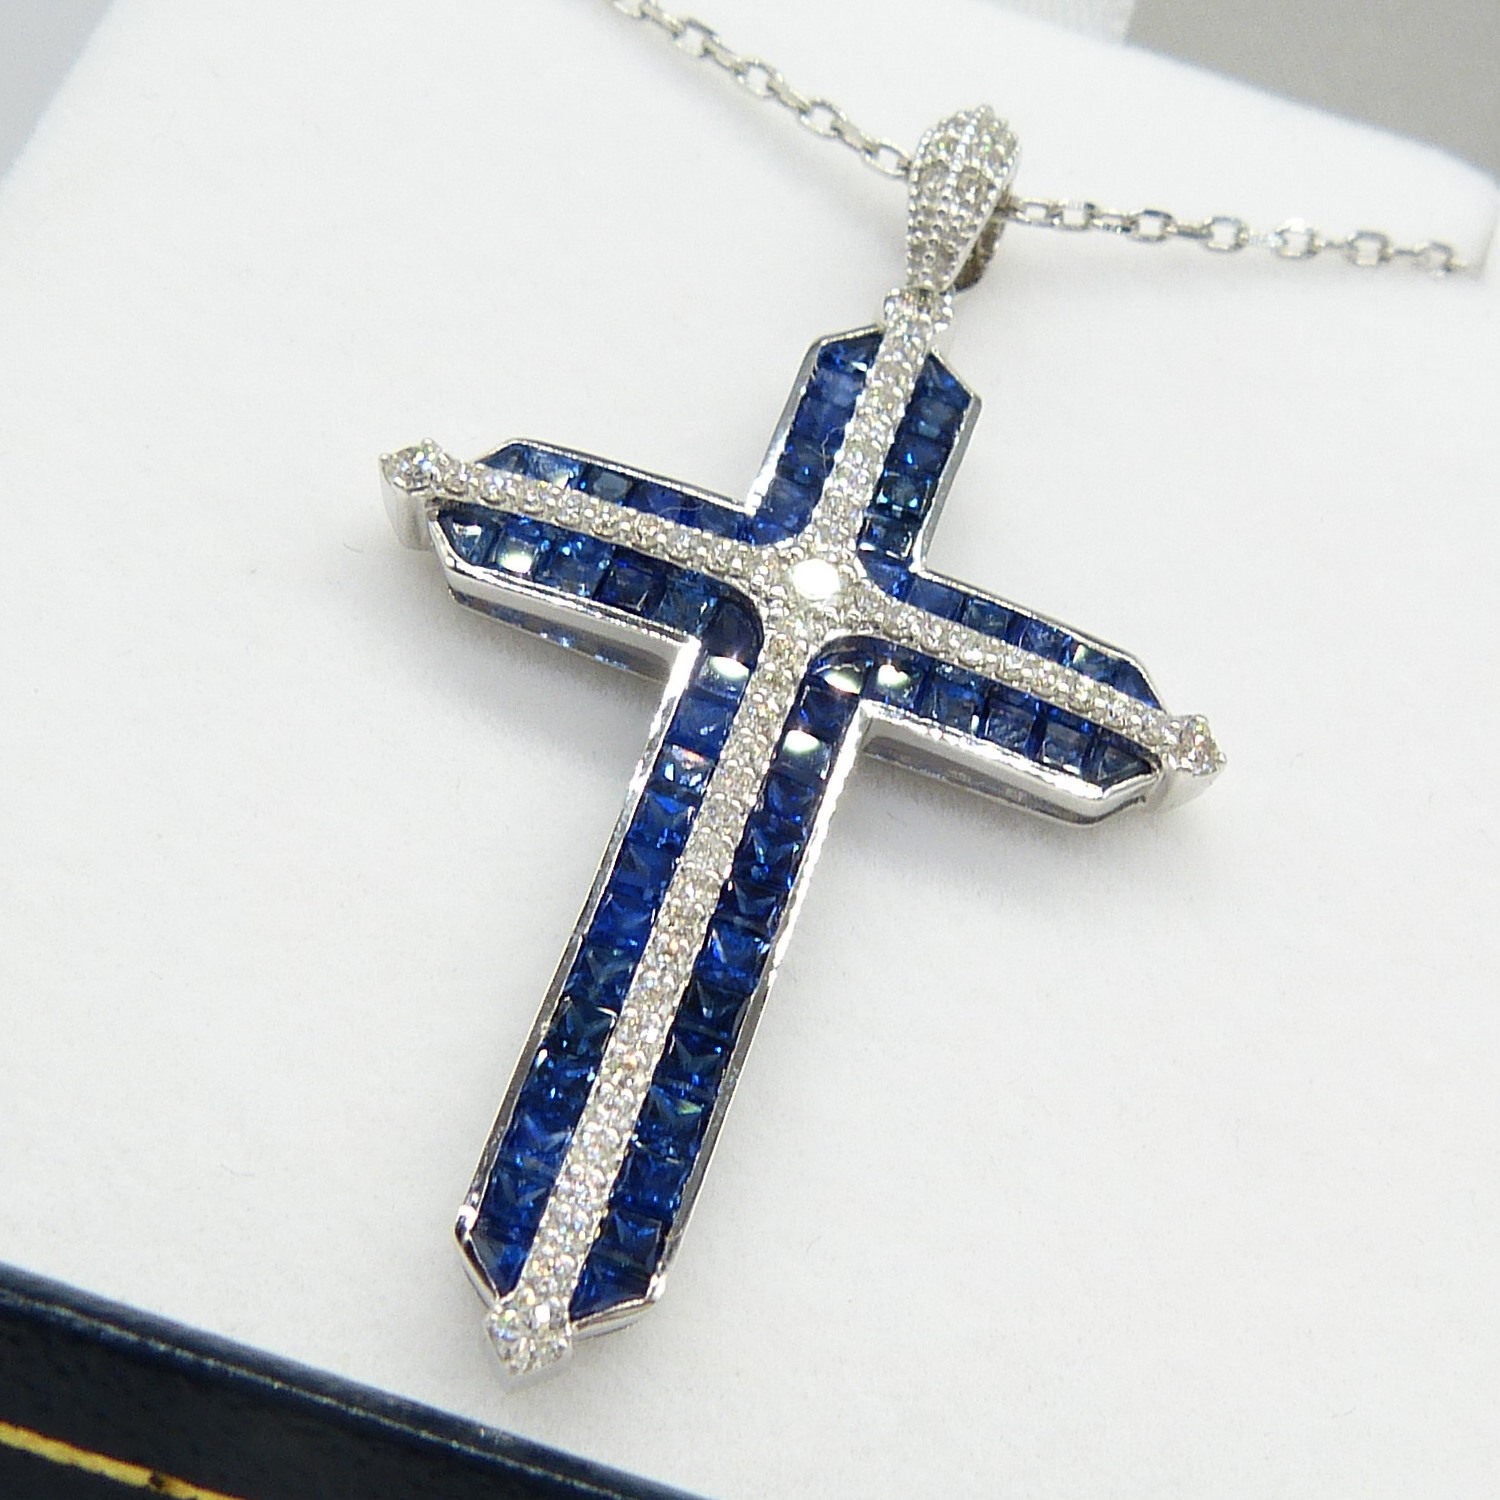 Impressive cross necklace set with natural sapphires and diamonds in 18ct white gold, boxed - Image 2 of 8